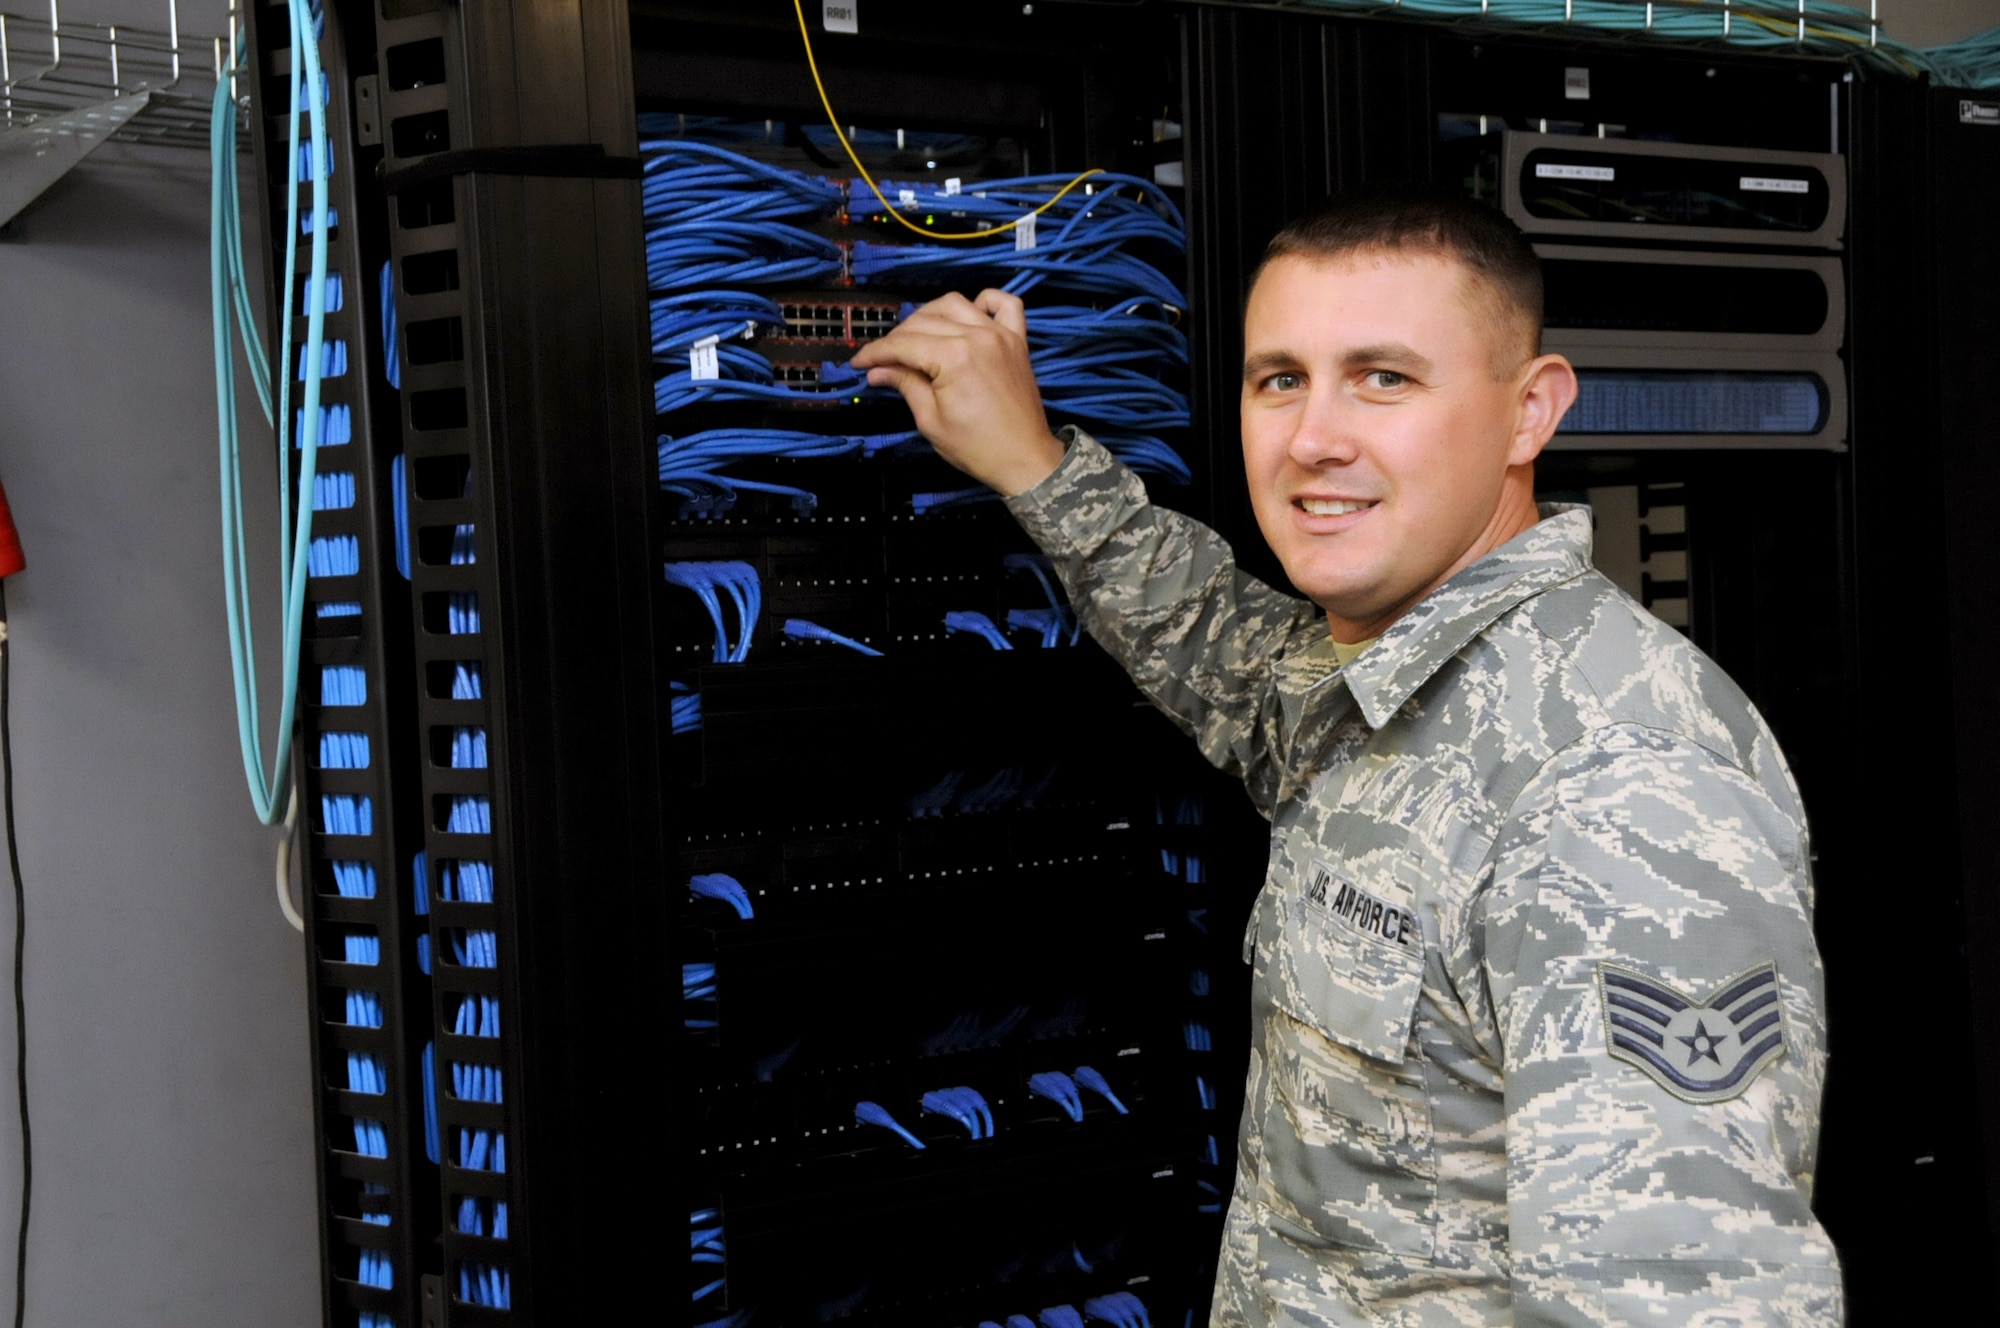 Staff Sgt. Chris Khoma from the 178th Communications Flight works on a computer system after the Command Cyber Readiness Inspection at the Springfield Air National Guard Base, Oct. 9. Khoma played a key role in preparing for the September CCRI, in which the inspection team graded the 178th with an Excellent score. (Ohio Air National Guard photo by Senior Master Sgt. Joseph Stahl/Released)